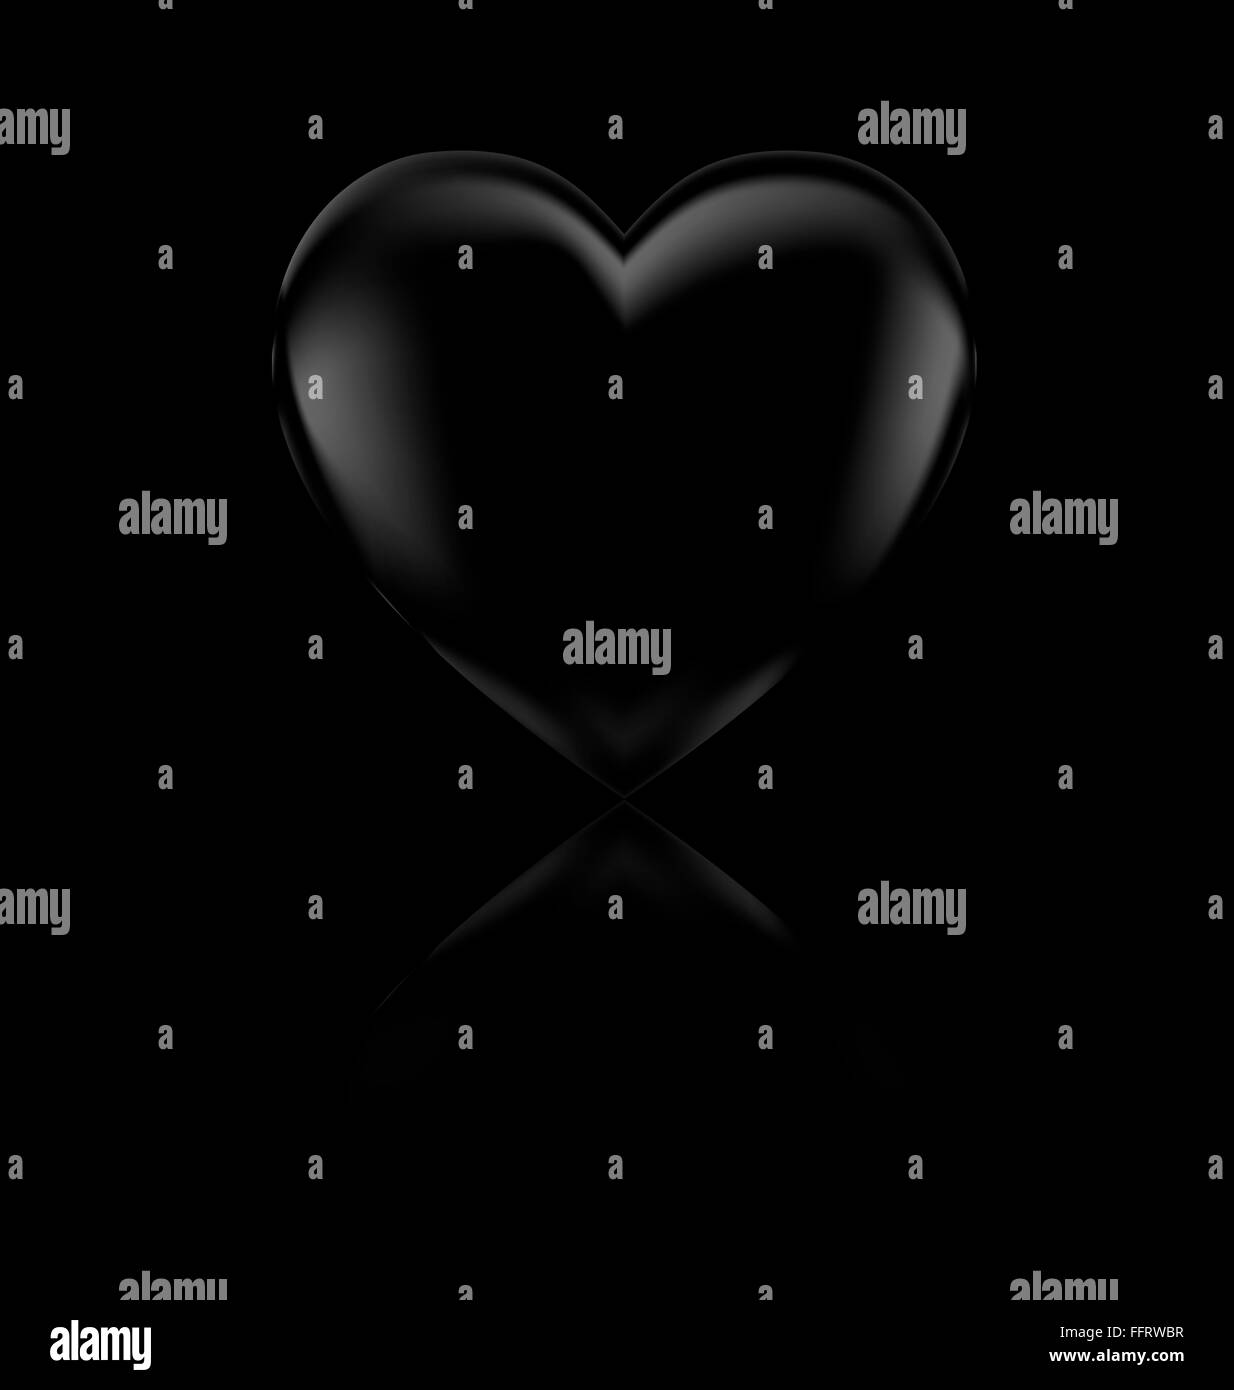 dark background and the large black heart Stock Photo